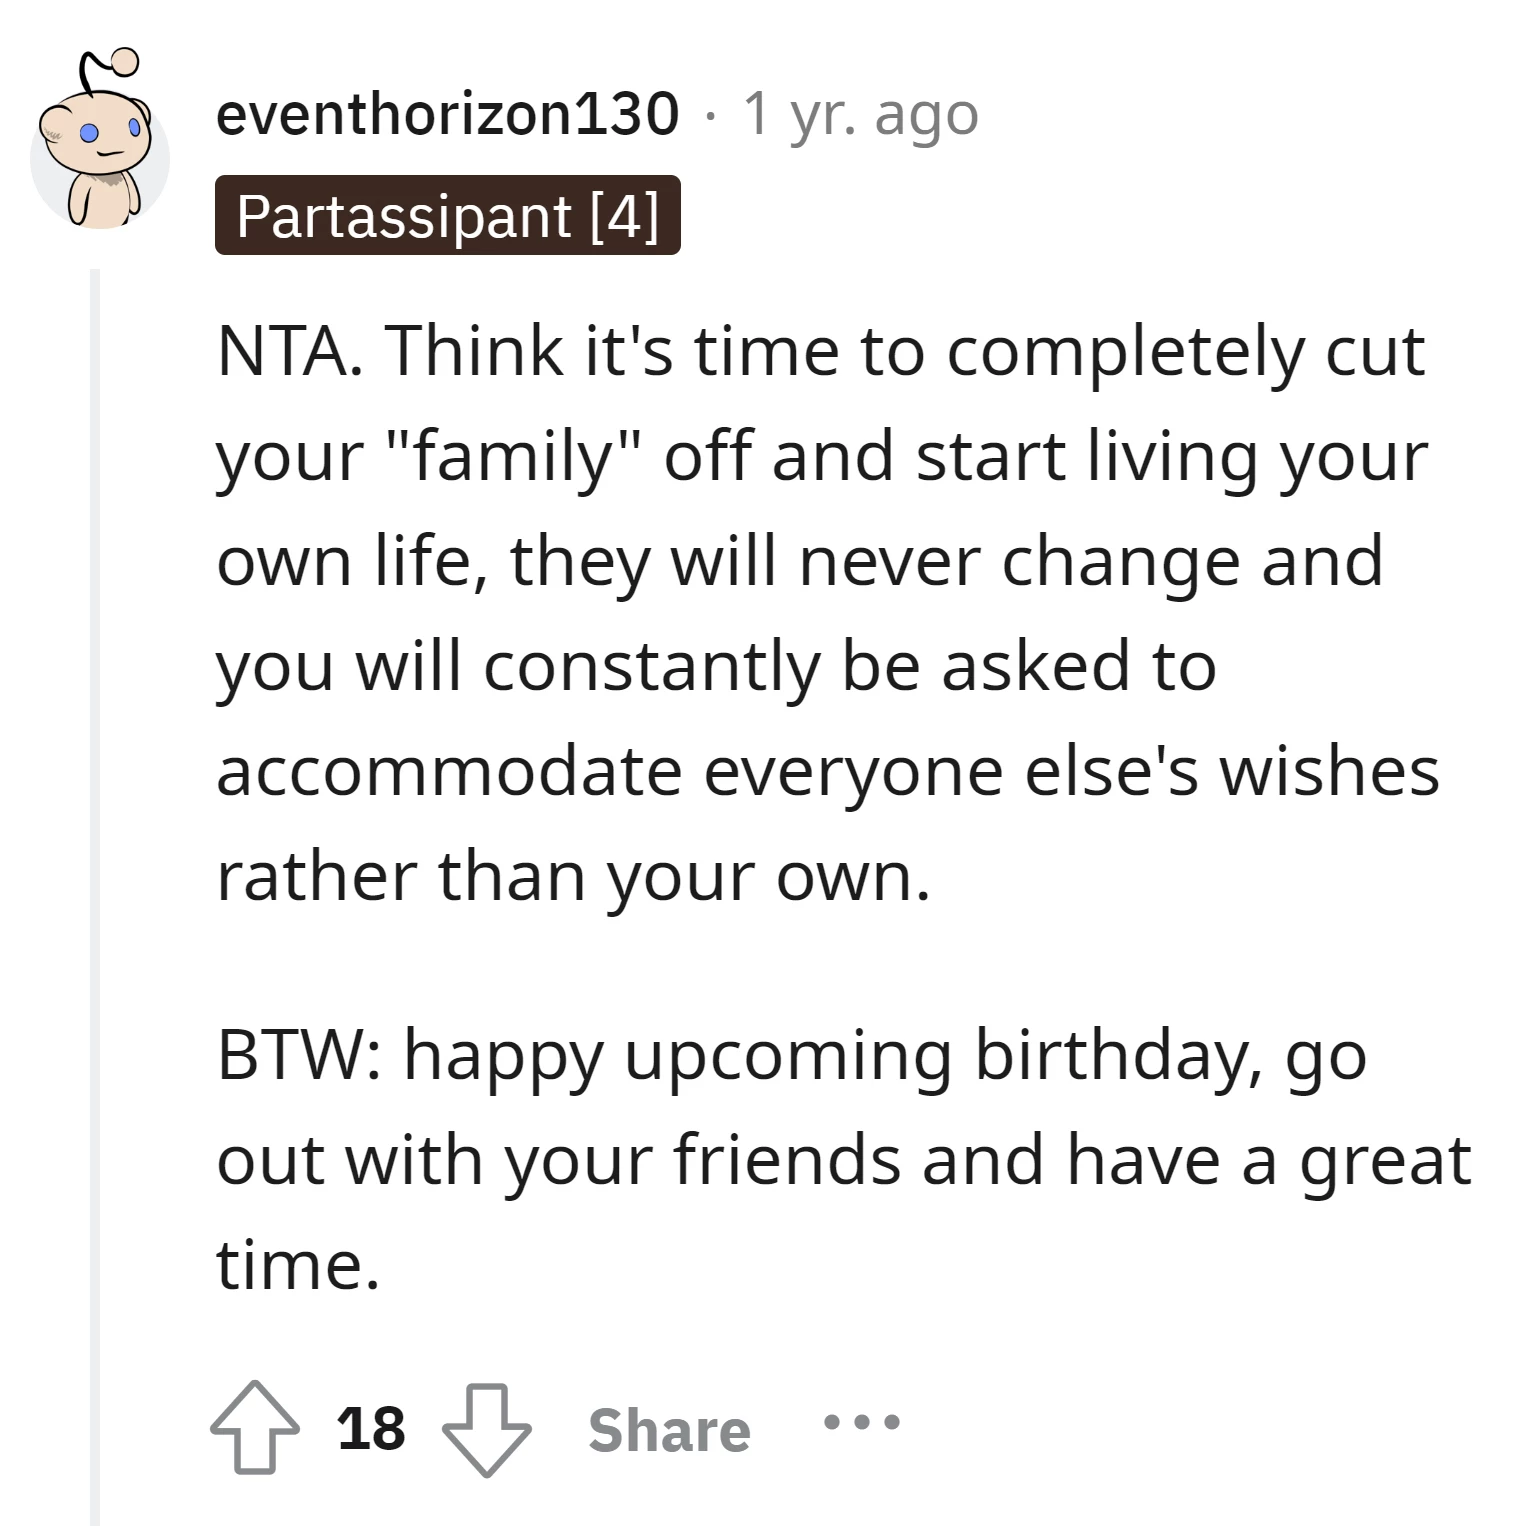 The commenter advises the OP to cut ties with their family